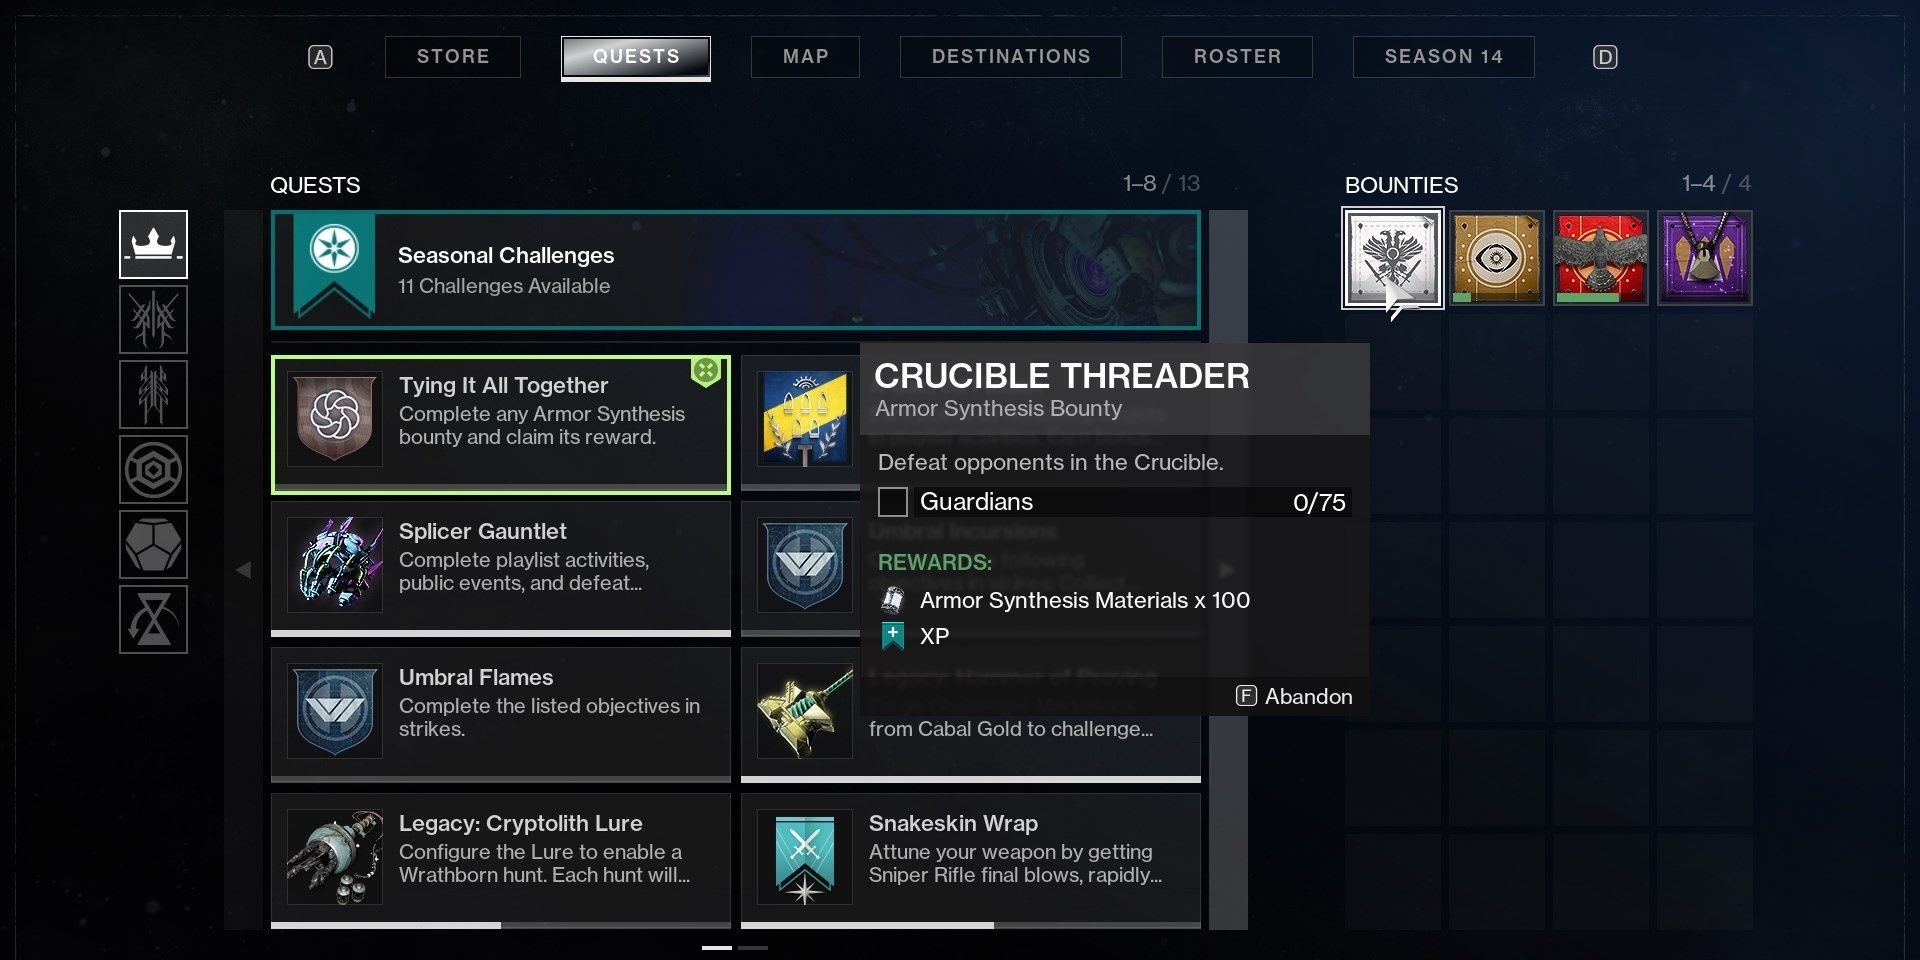 Destiny 2 Tying It All Together Crucible Bounty